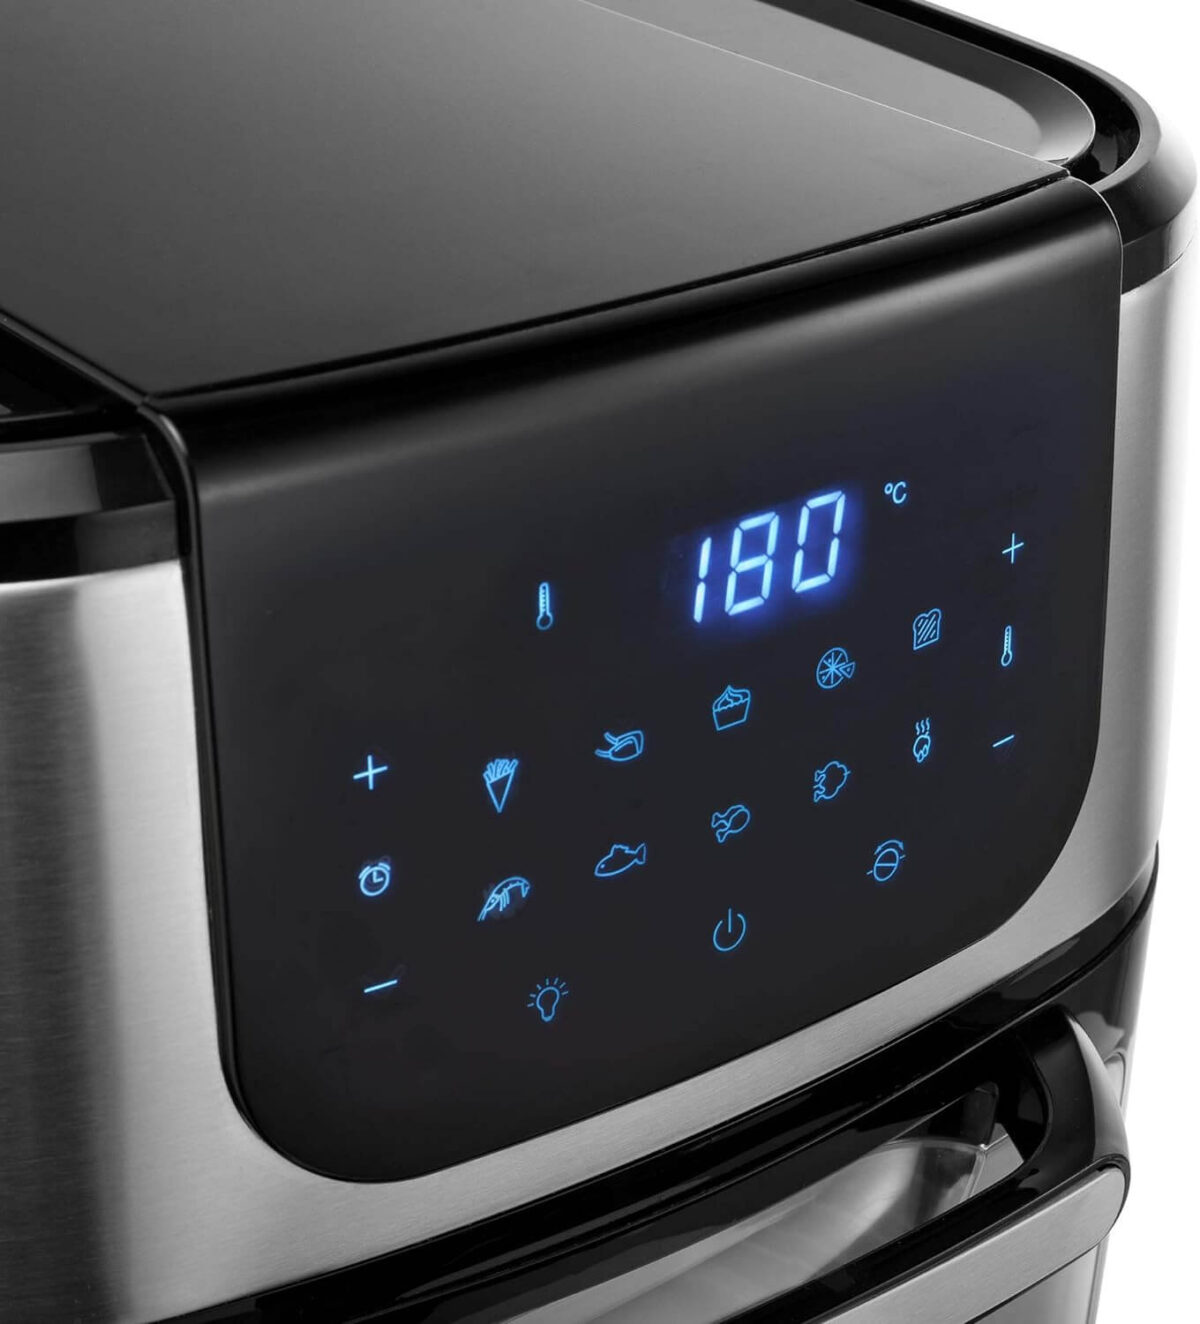 Princess Airfryer Deluxe panel